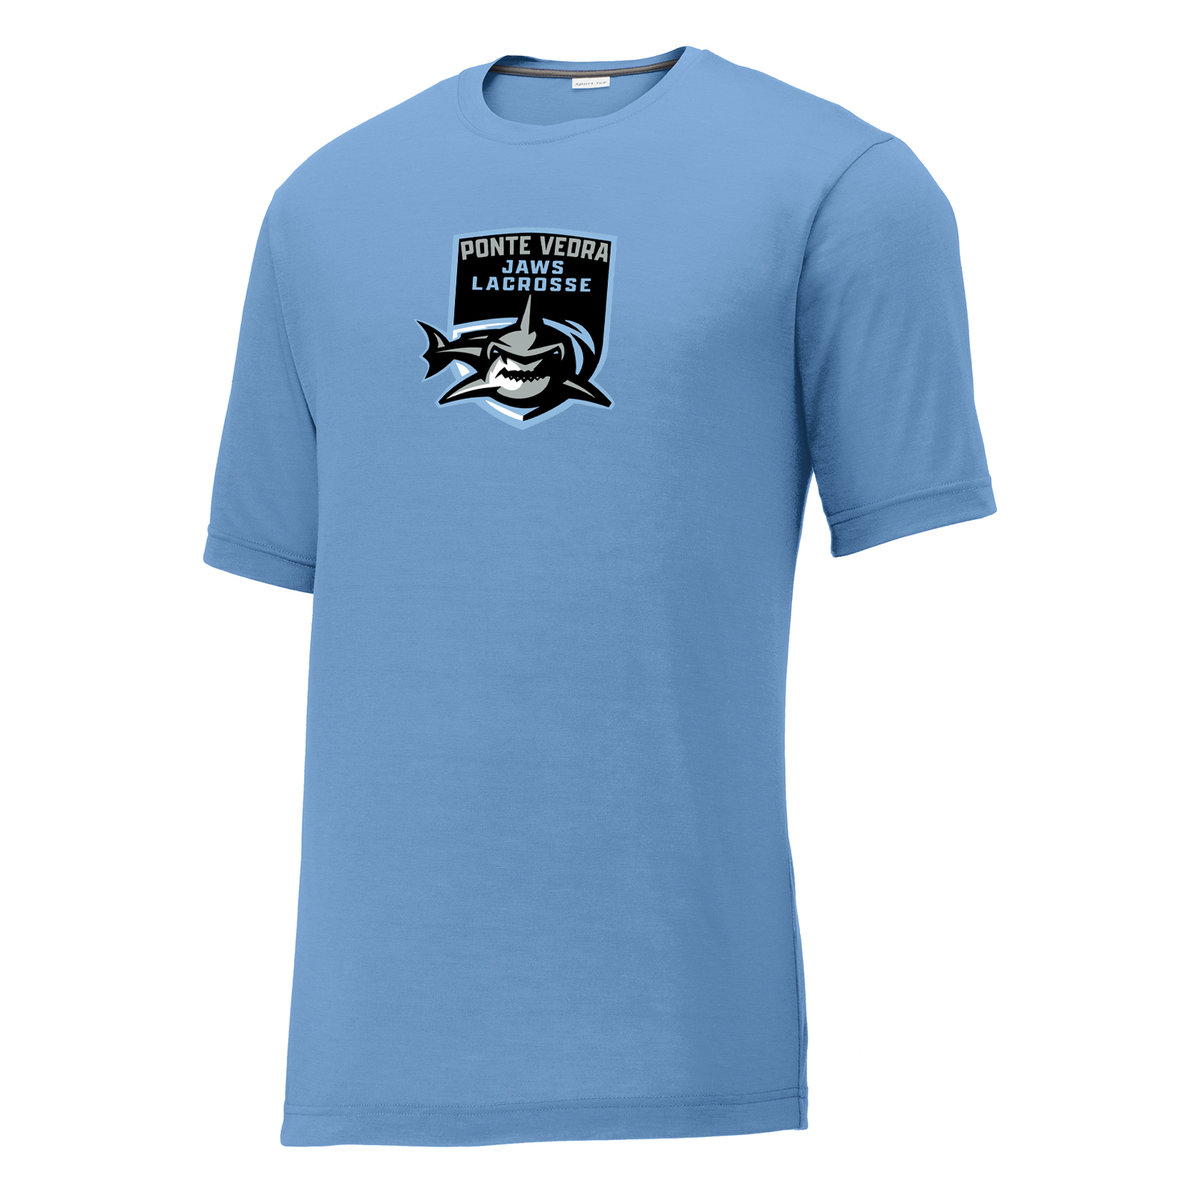 Ponte Vedra JAWS Lacrosse CottonTouch Performance T-Shirt